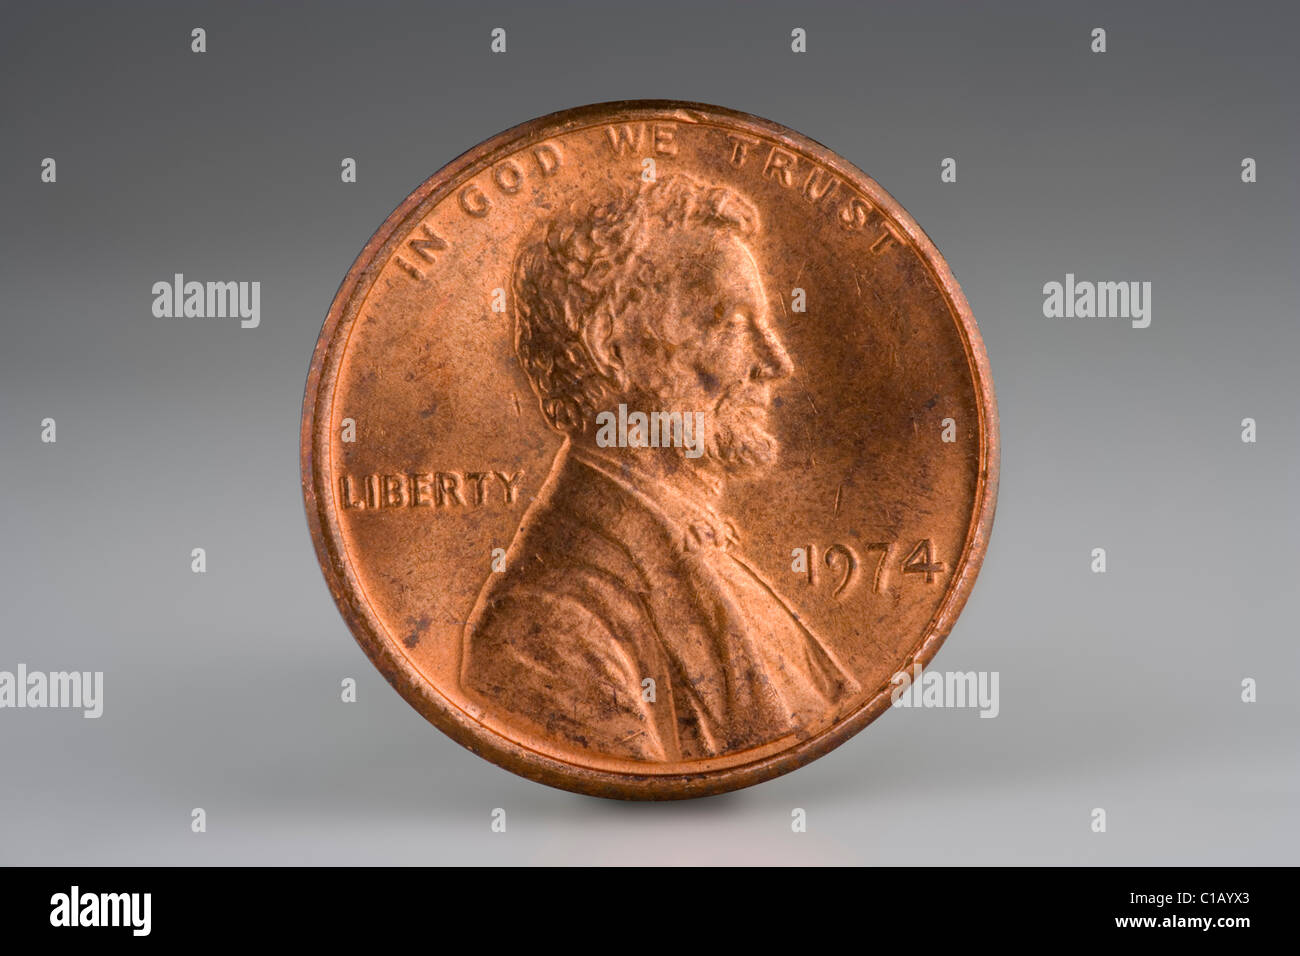 US 1 cent copper penny from 1974. Pennies made prior to 1983 had a much higher copper content and as a result of rising metals Stock Photo